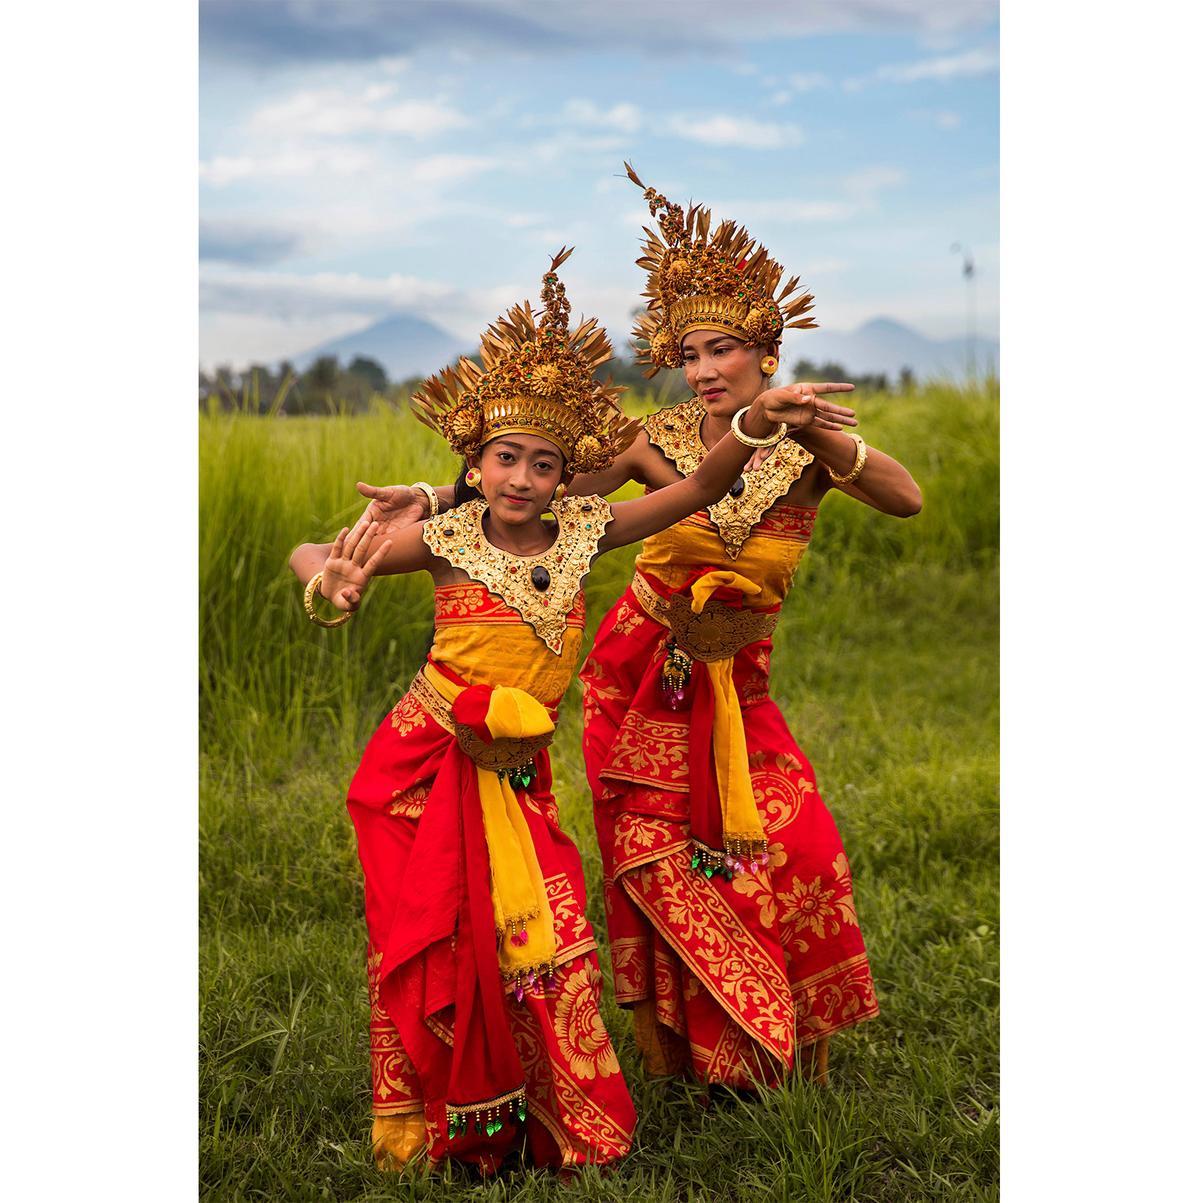 BALI, INDONESIA, "Mother teaching her daughter a traditional dance" (Courtesy of <a href="https://theatlasofbeauty.com/">Mihaela Noroc</a>)